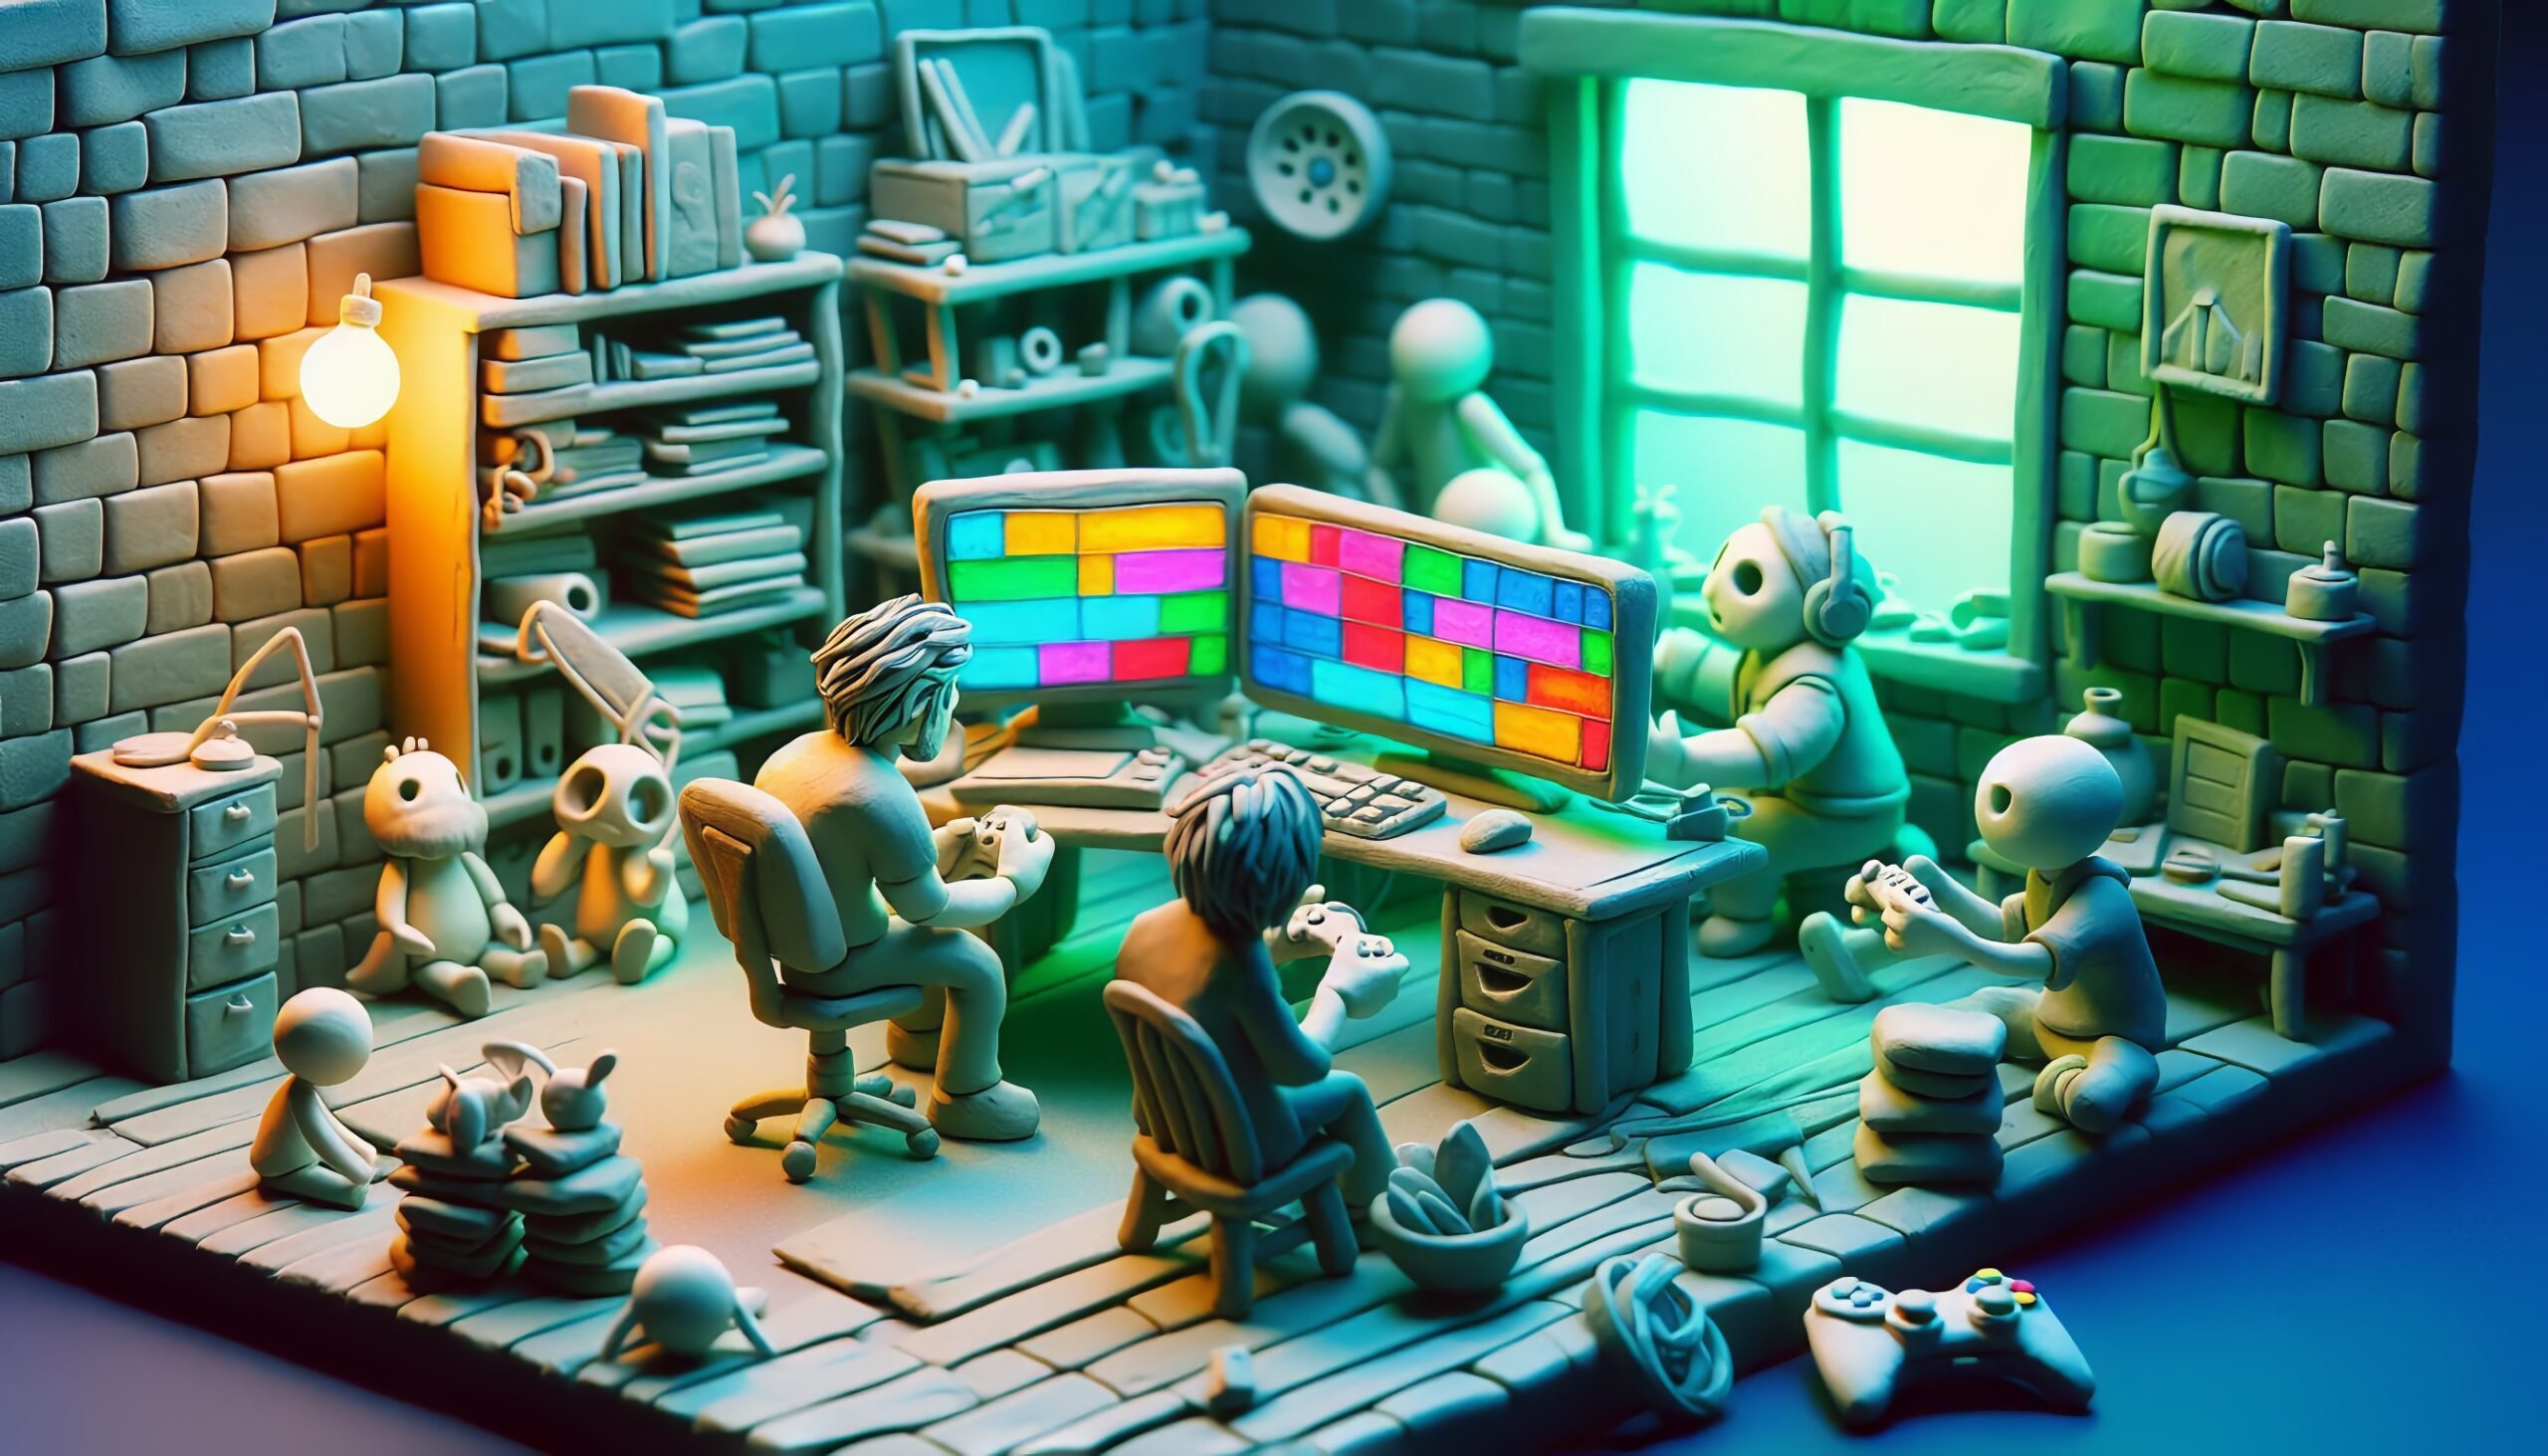 An animated scene of small, whimsical characters engaged in various digital tasks in a colorful, cluttered room with brick walls, two large monitors displaying vibrant blocks of color, and items like headphones, books, and gaming controllers scattered around.